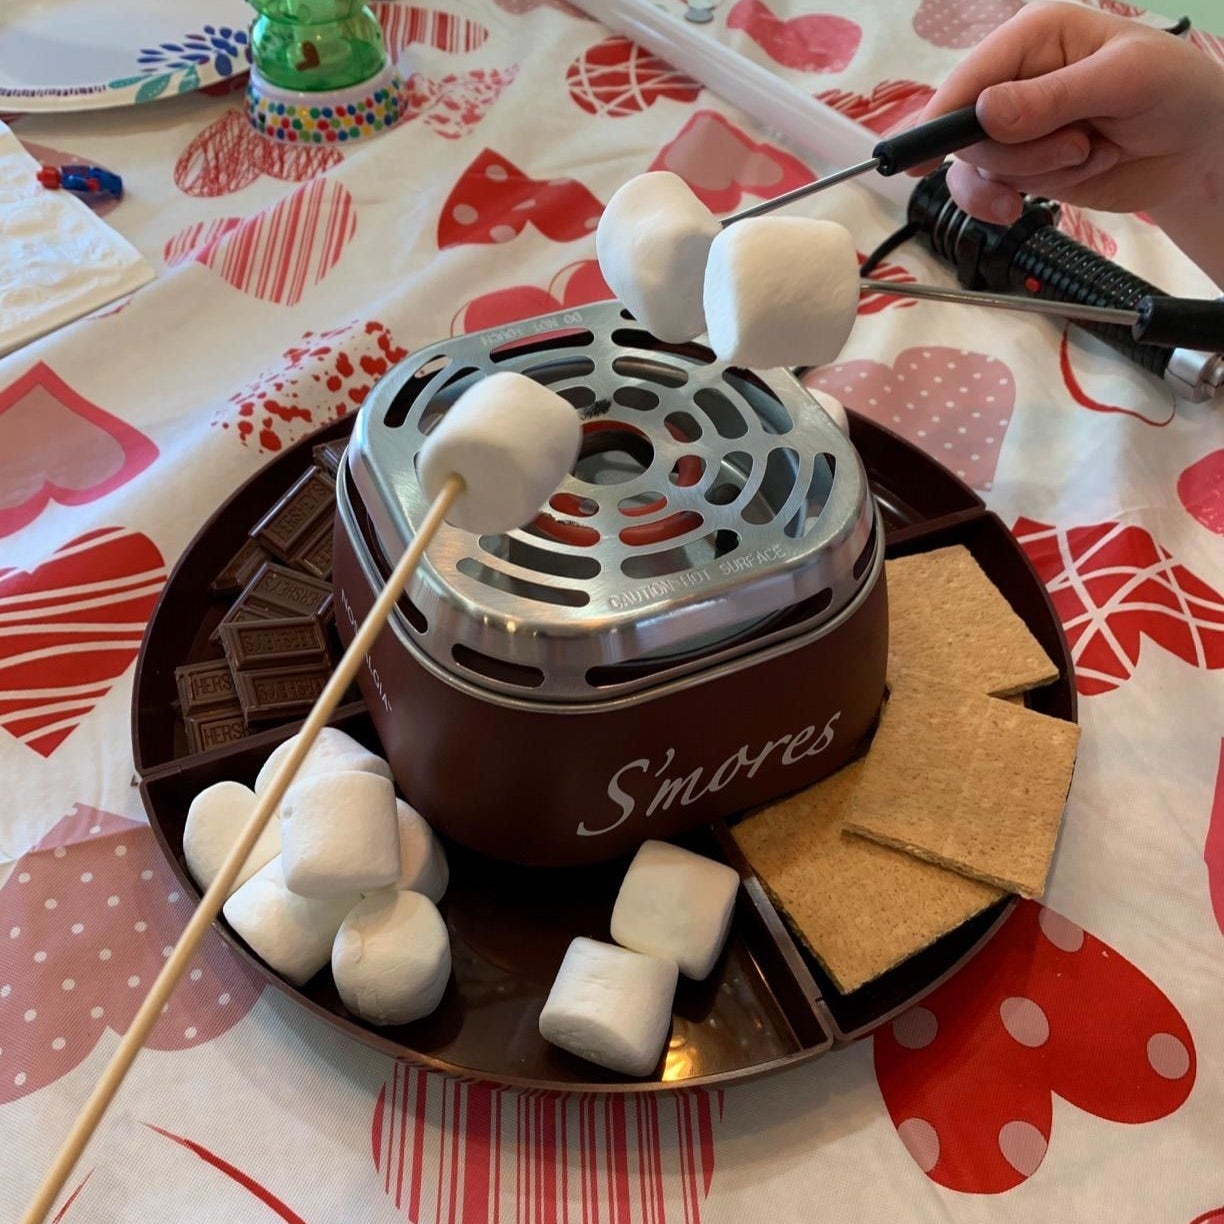 A reviewer&#x27;s s&#x27;mores maker in use with marshmallows, chocolate, and graham crackers in the tray